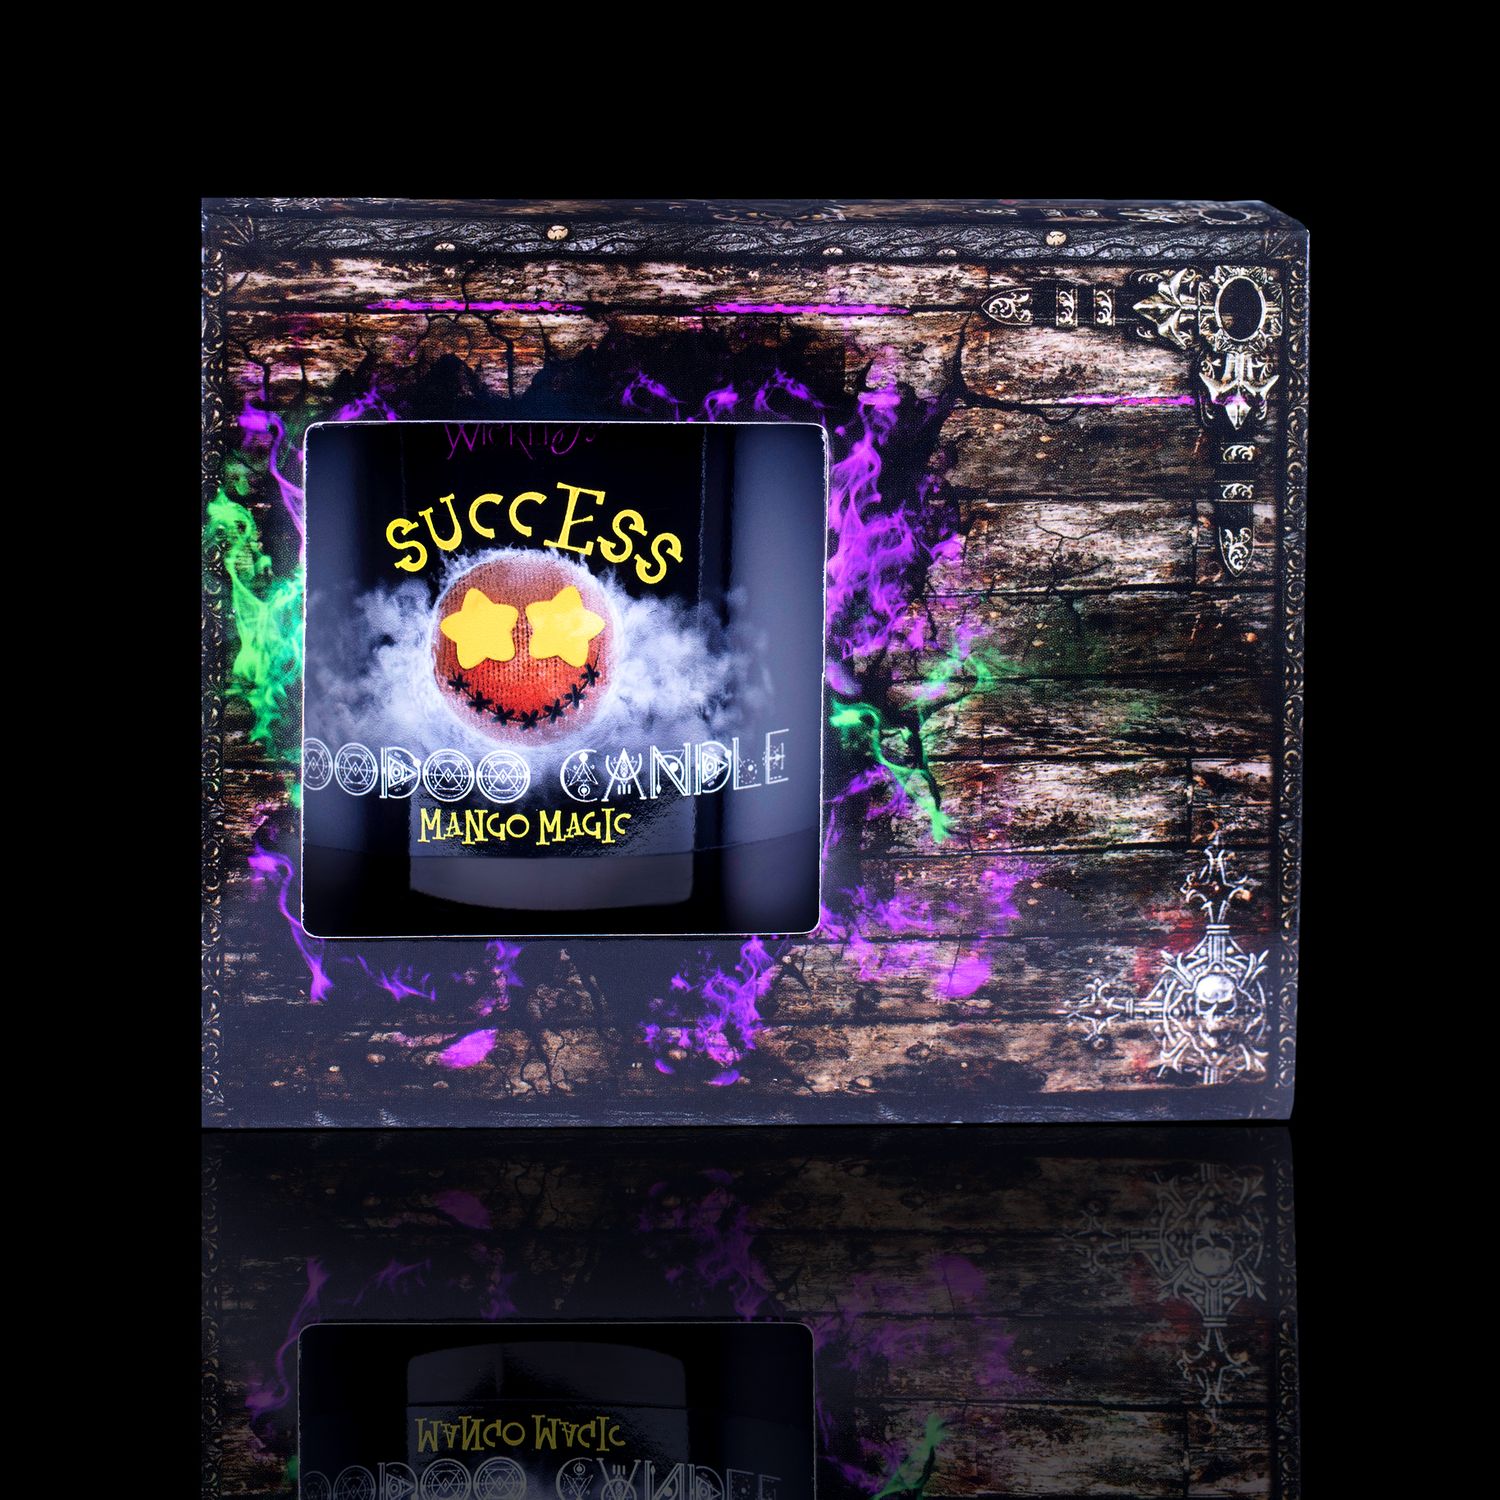  The Perfect Spell Candle For Success. Naturally Wicked Voodoo Success Candle Displayed In A Haunting Treasure Chest Gift Box. The Candle Features Plant-Based Smooth Yellow Wax, A Wood Wick, Yellow Voodoo Doll And A Beautiful Yellow Jade Crystal Wand.